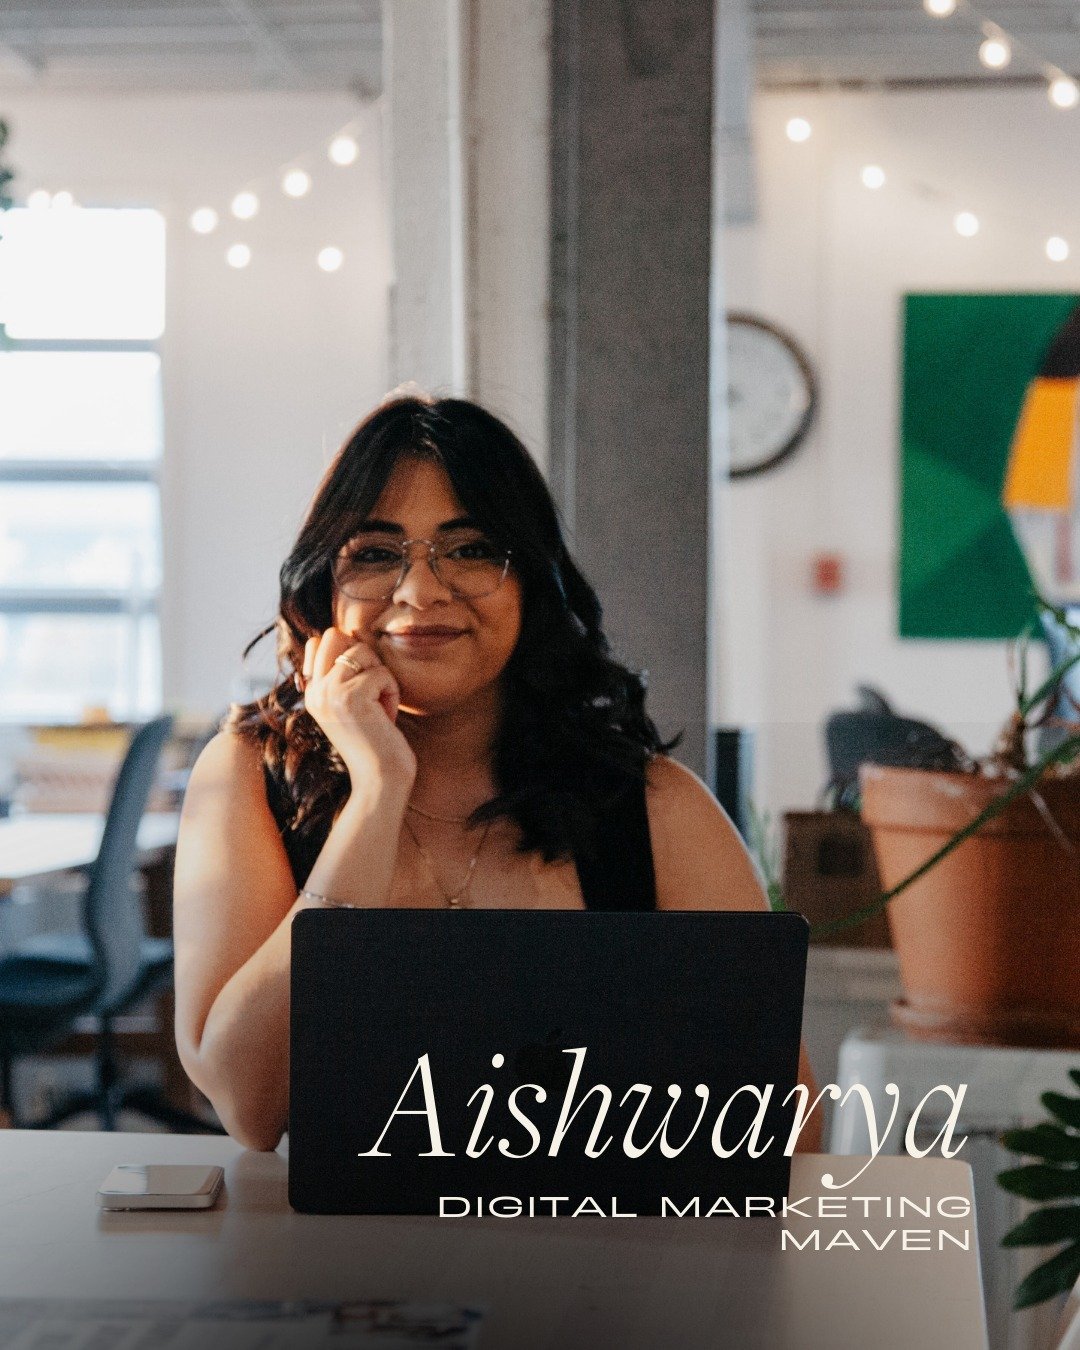 Meet Aishwarya!⁠
⁠
Her journey into the digital marketing realm accelerated after mastering her skills in traditional and digital marketing strategies. Aishwarya&rsquo;s talent for painting the digital world with innovative ideas has made her a pivot